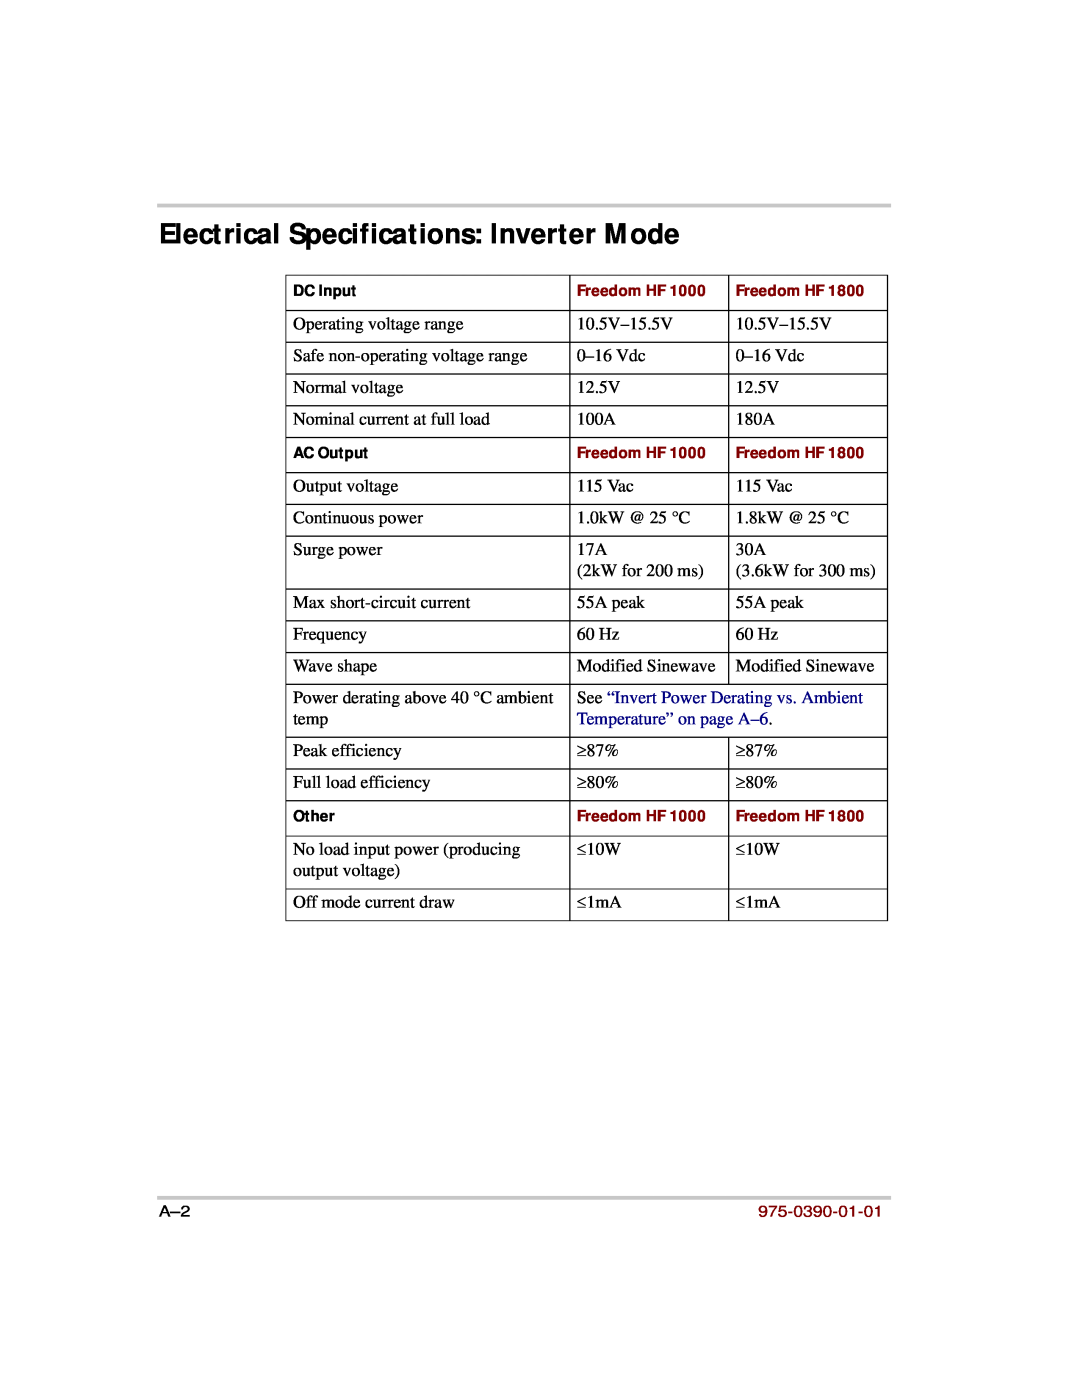 Xantrex Technology HF 1000 Electrical Specifications Inverter Mode, DC Input, Freedom HF, AC Output, Other, 975-0390-01-01 